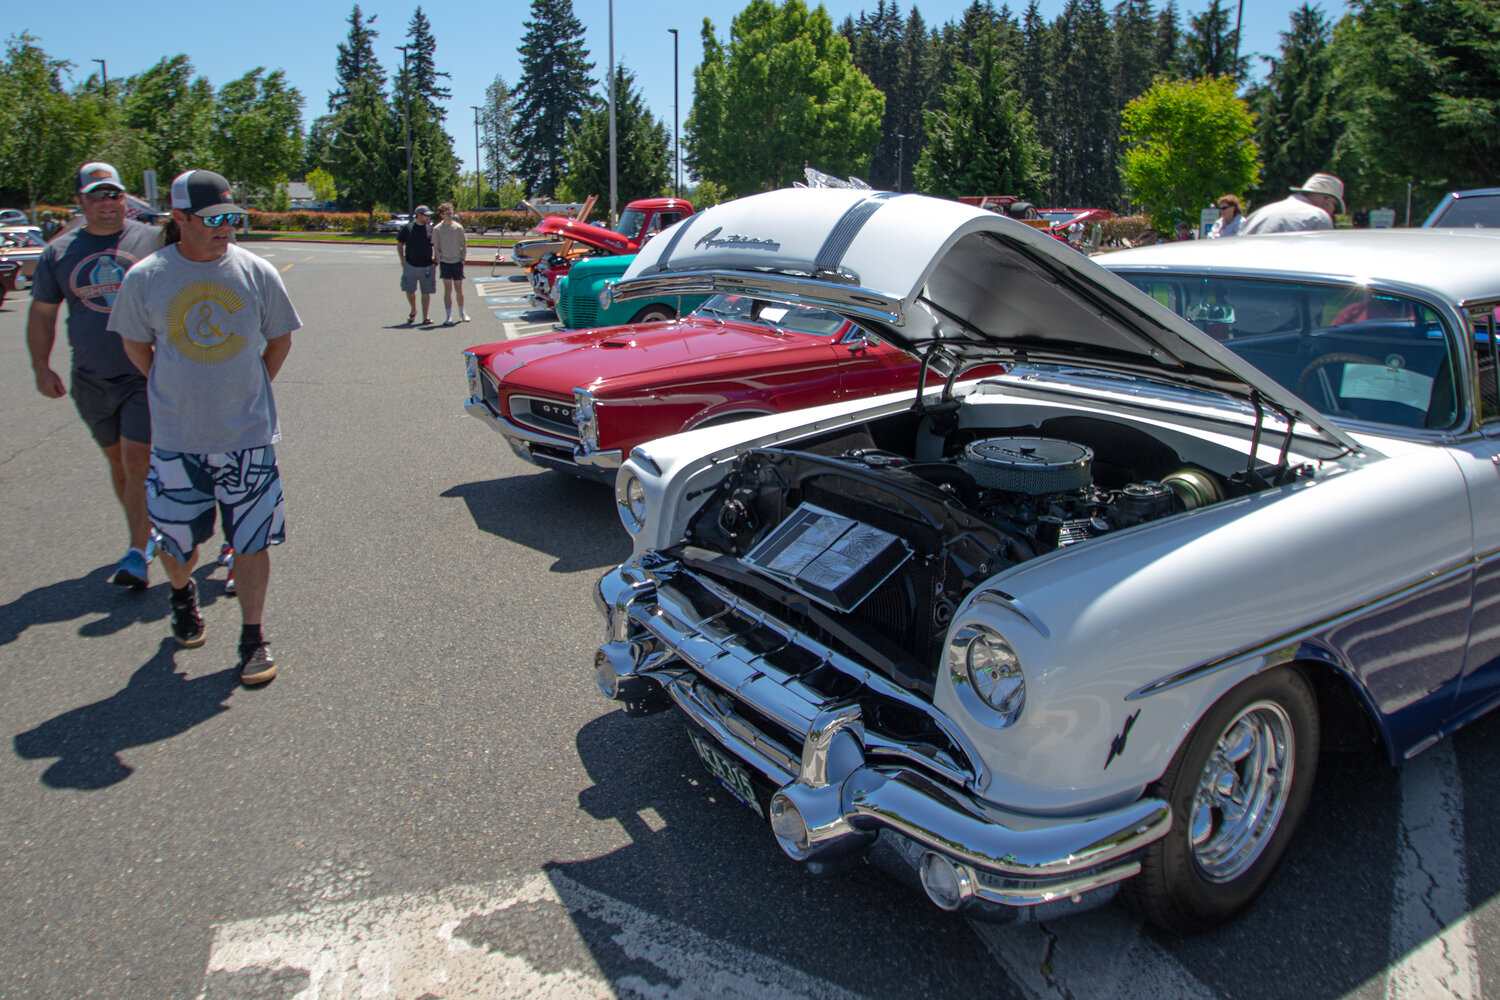 Car show attendees look at Thomas Kelly's restored 1956 Pontiac Safari wagon on Sunday, June 4, at the Yelm High School car show.